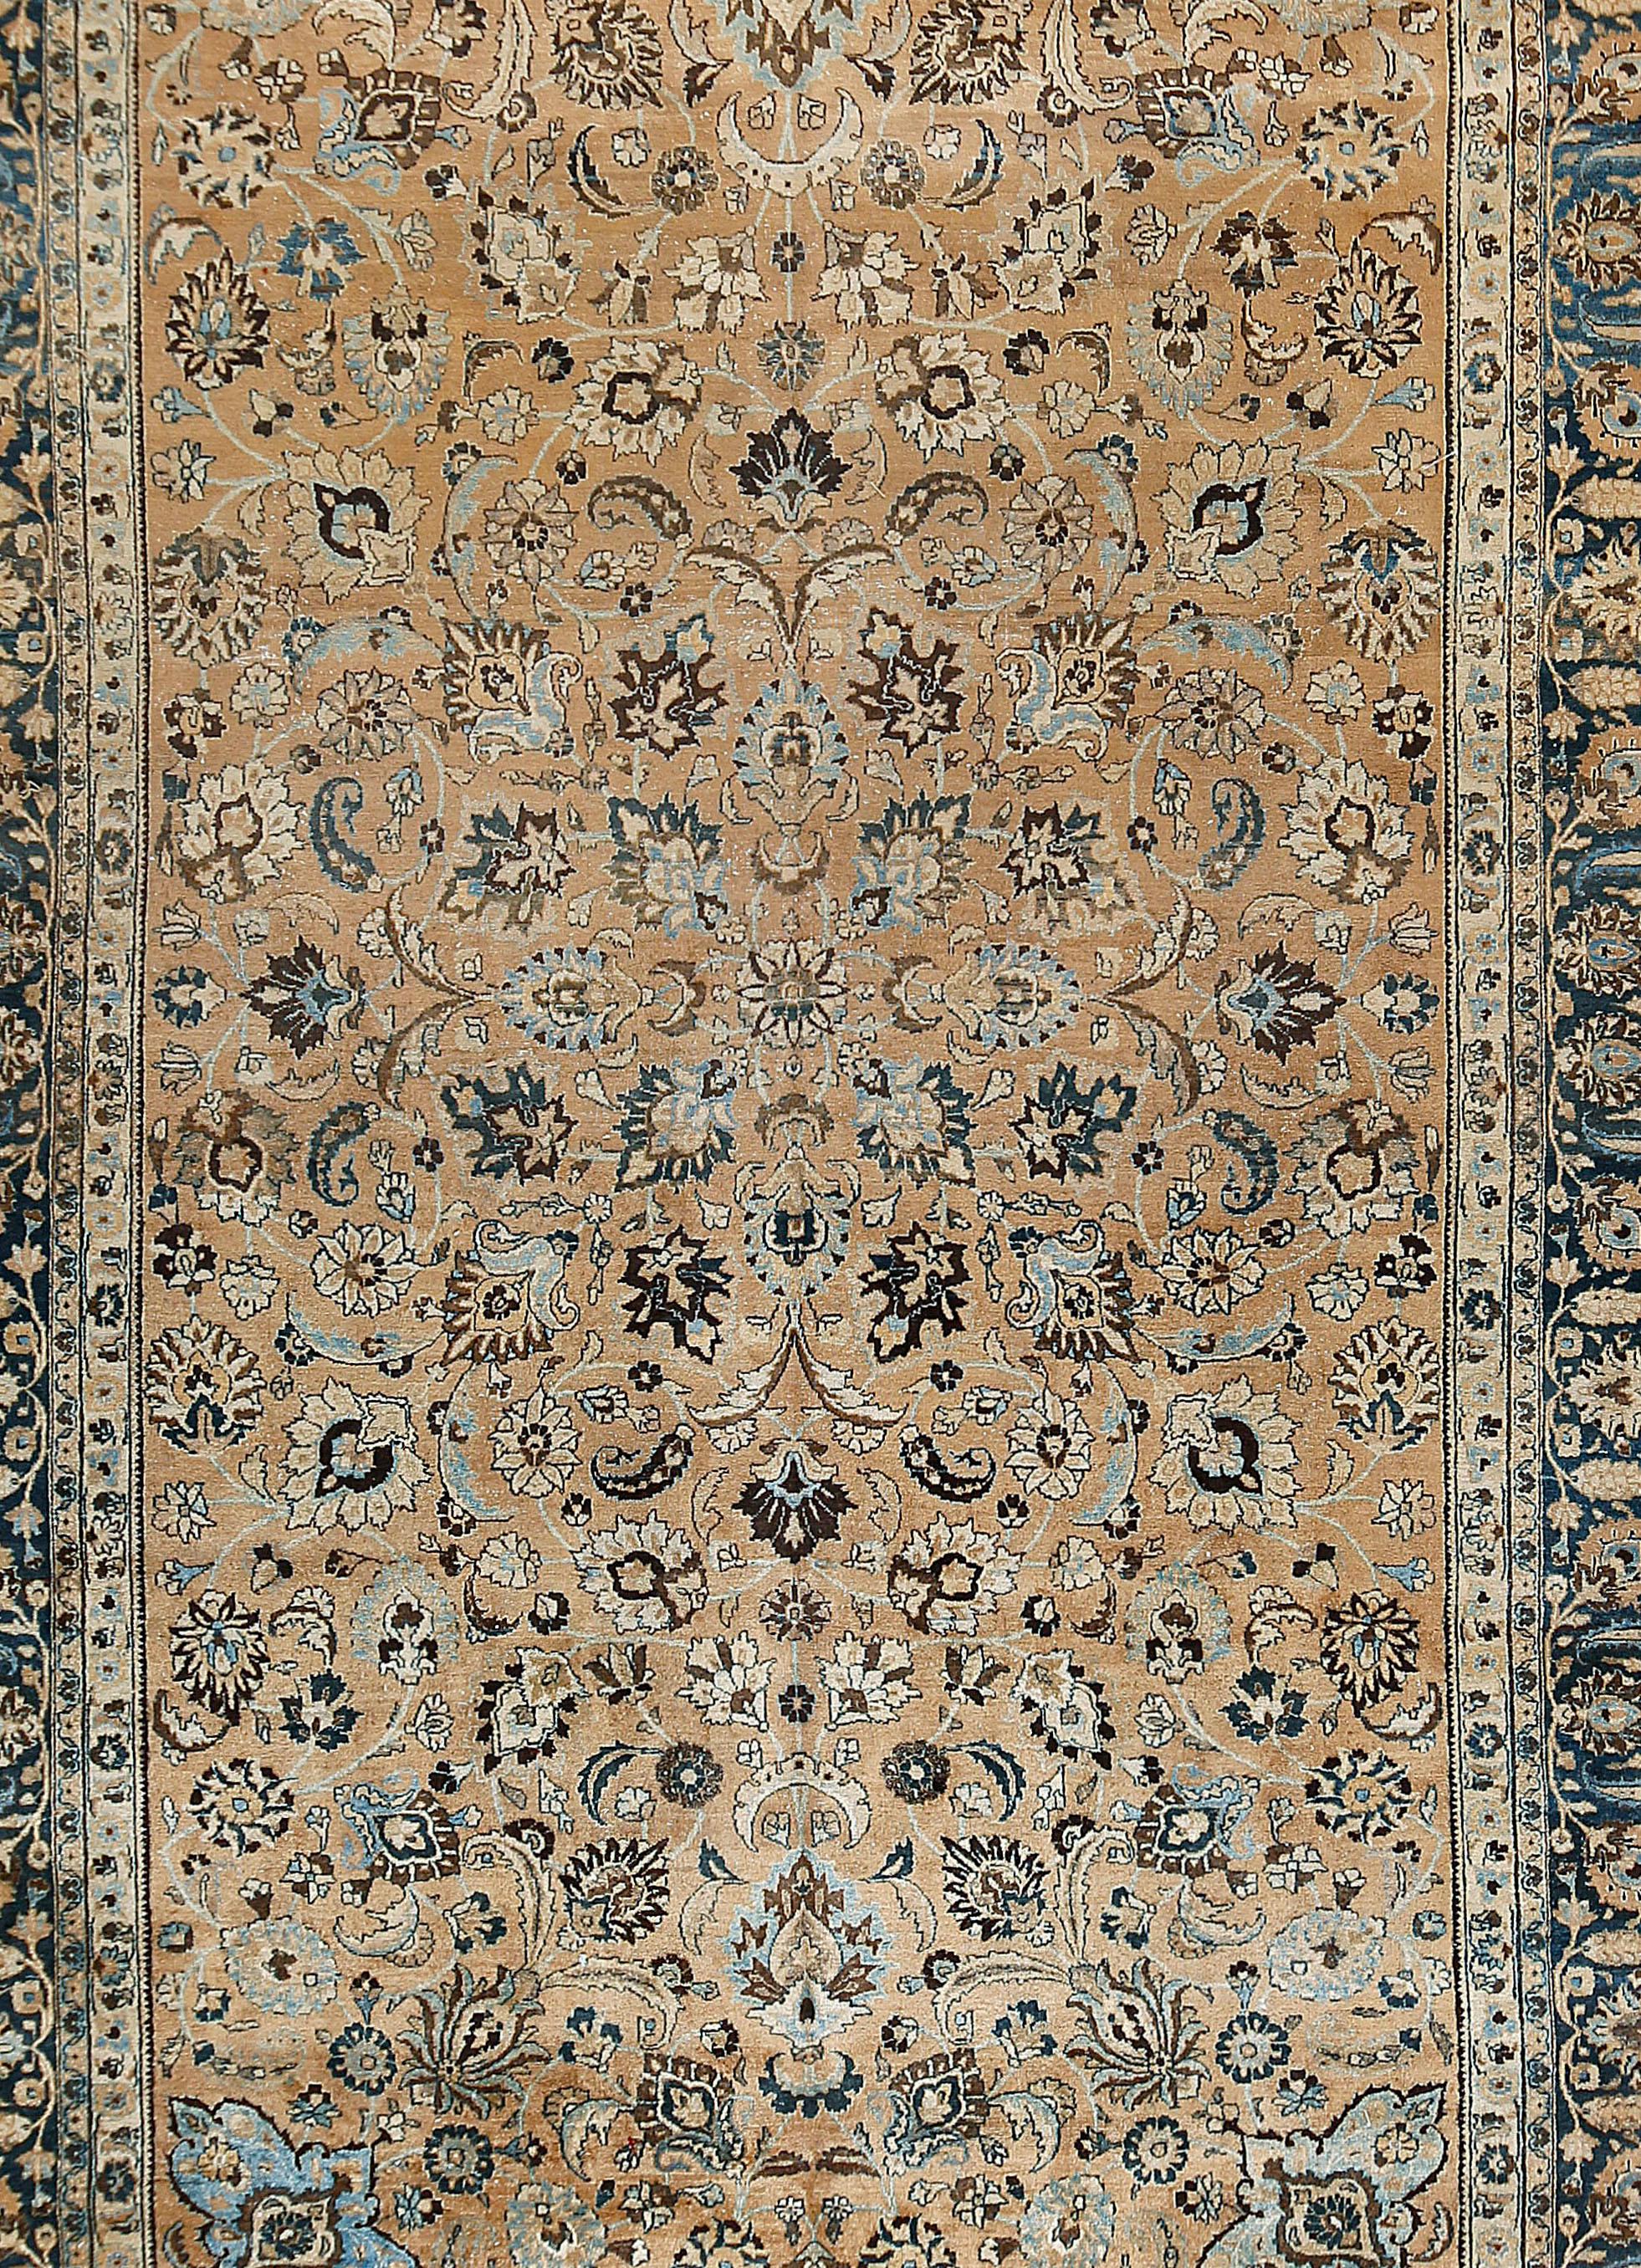 Vintage Persian Meshad rug, 9'7 x 16'6. The buff field displays a focused pattern of a multitude of various palmettes, rosettes, flowering vines, botehs and floating leaves. Light blue cartouches delineate the four field corners. The pattern